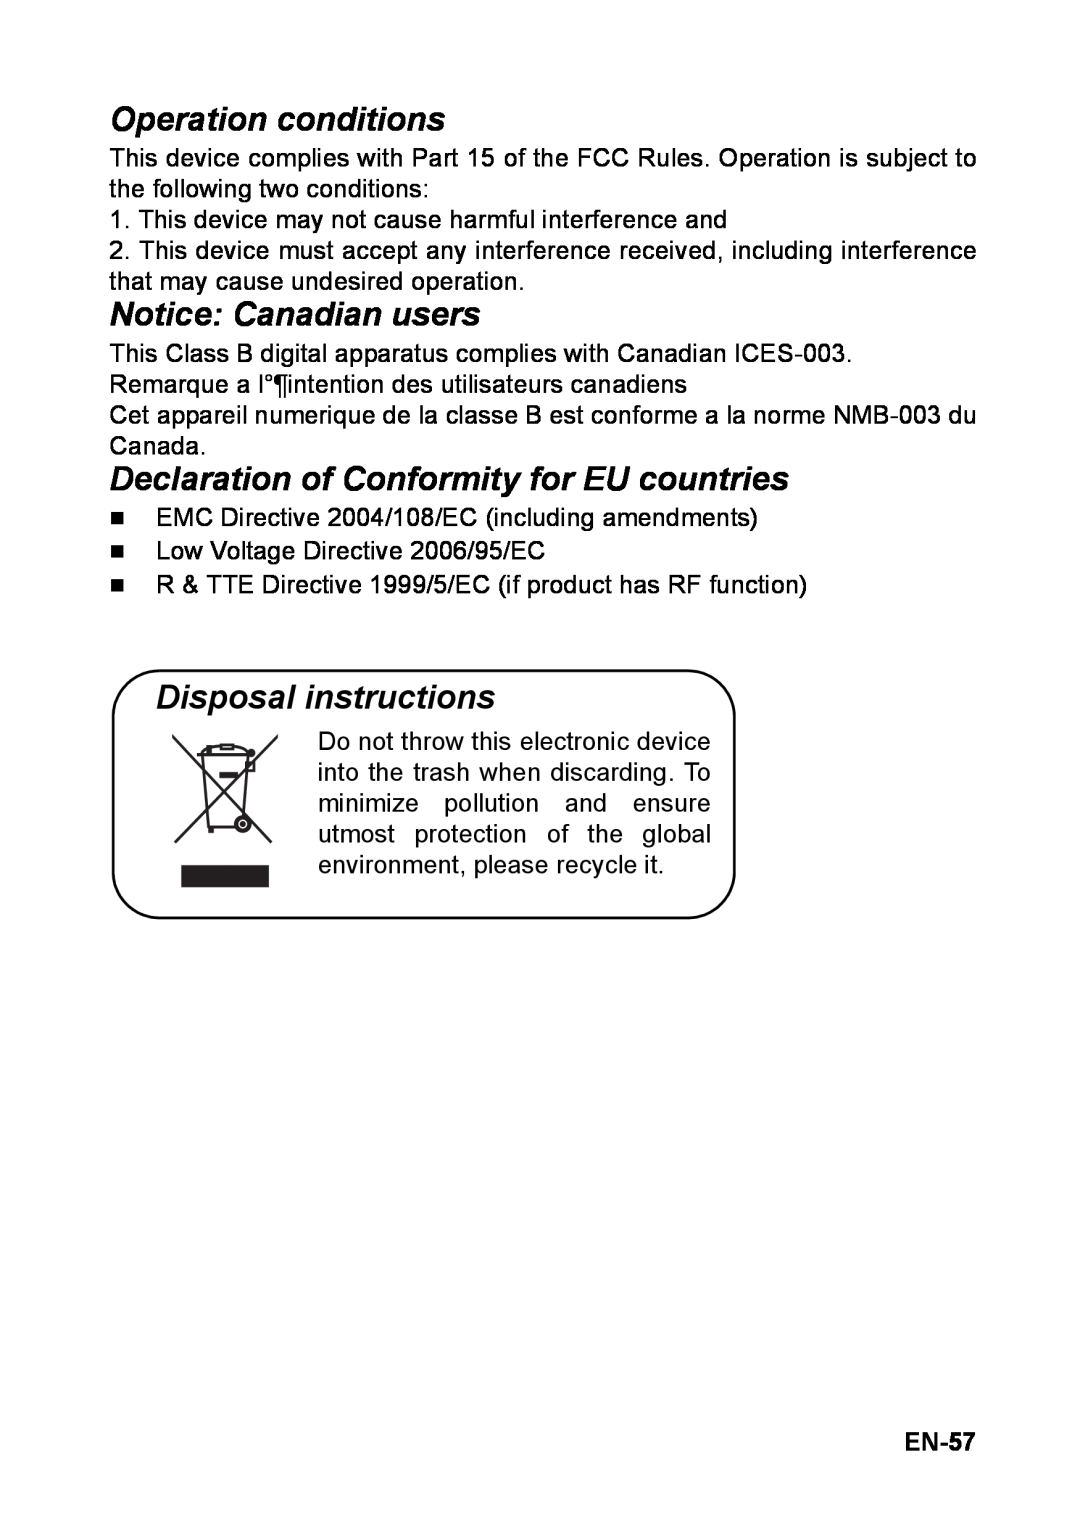 Optoma Technology TW6313D Operation conditions, Notice Canadian users, Declaration of Conformity for EU countries, EN-57 